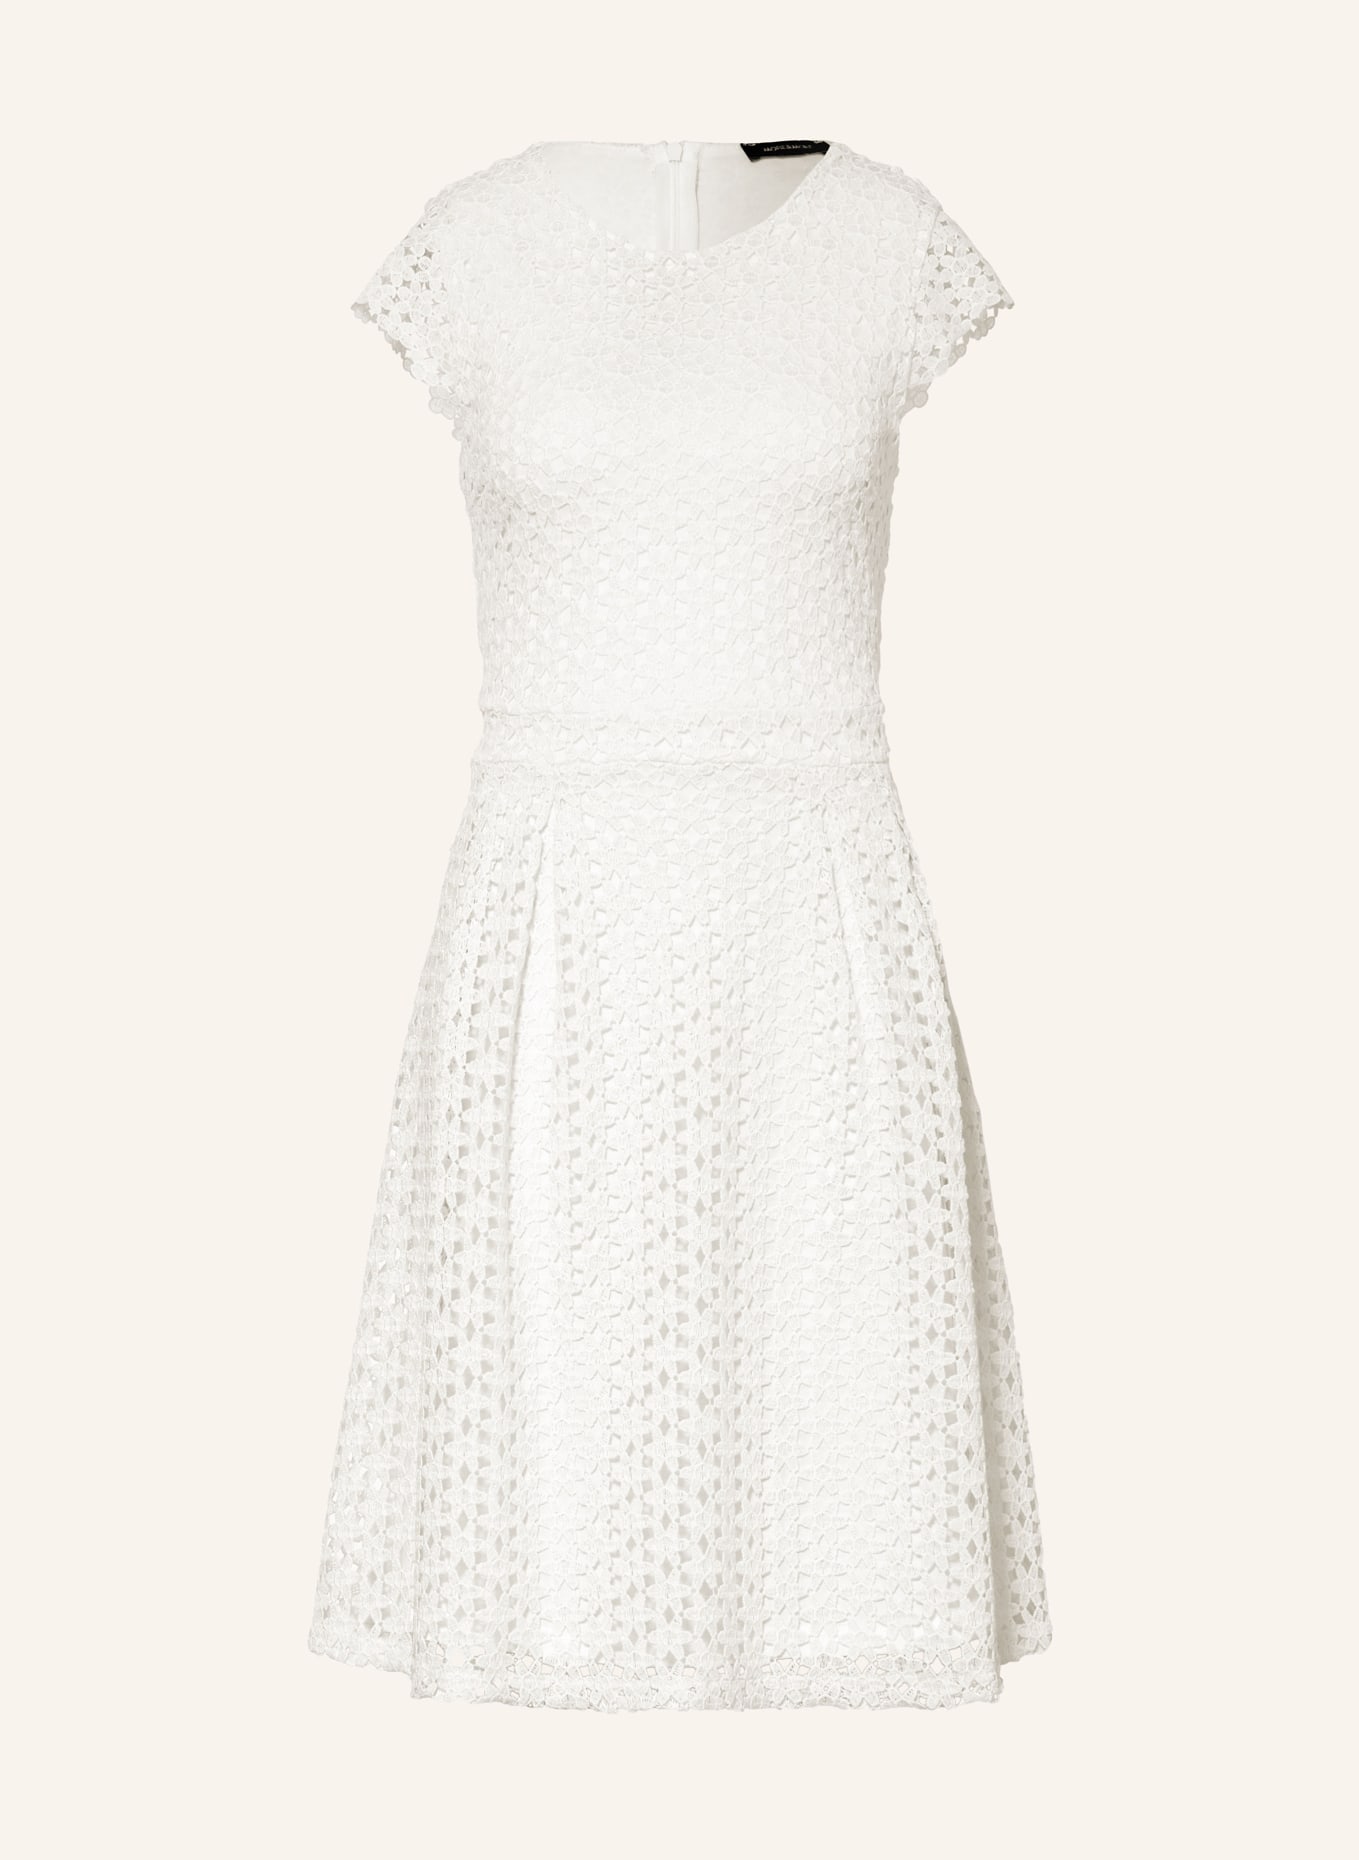 MORE & MORE Dress made of broderie anglaise, Color: ECRU (Image 1)